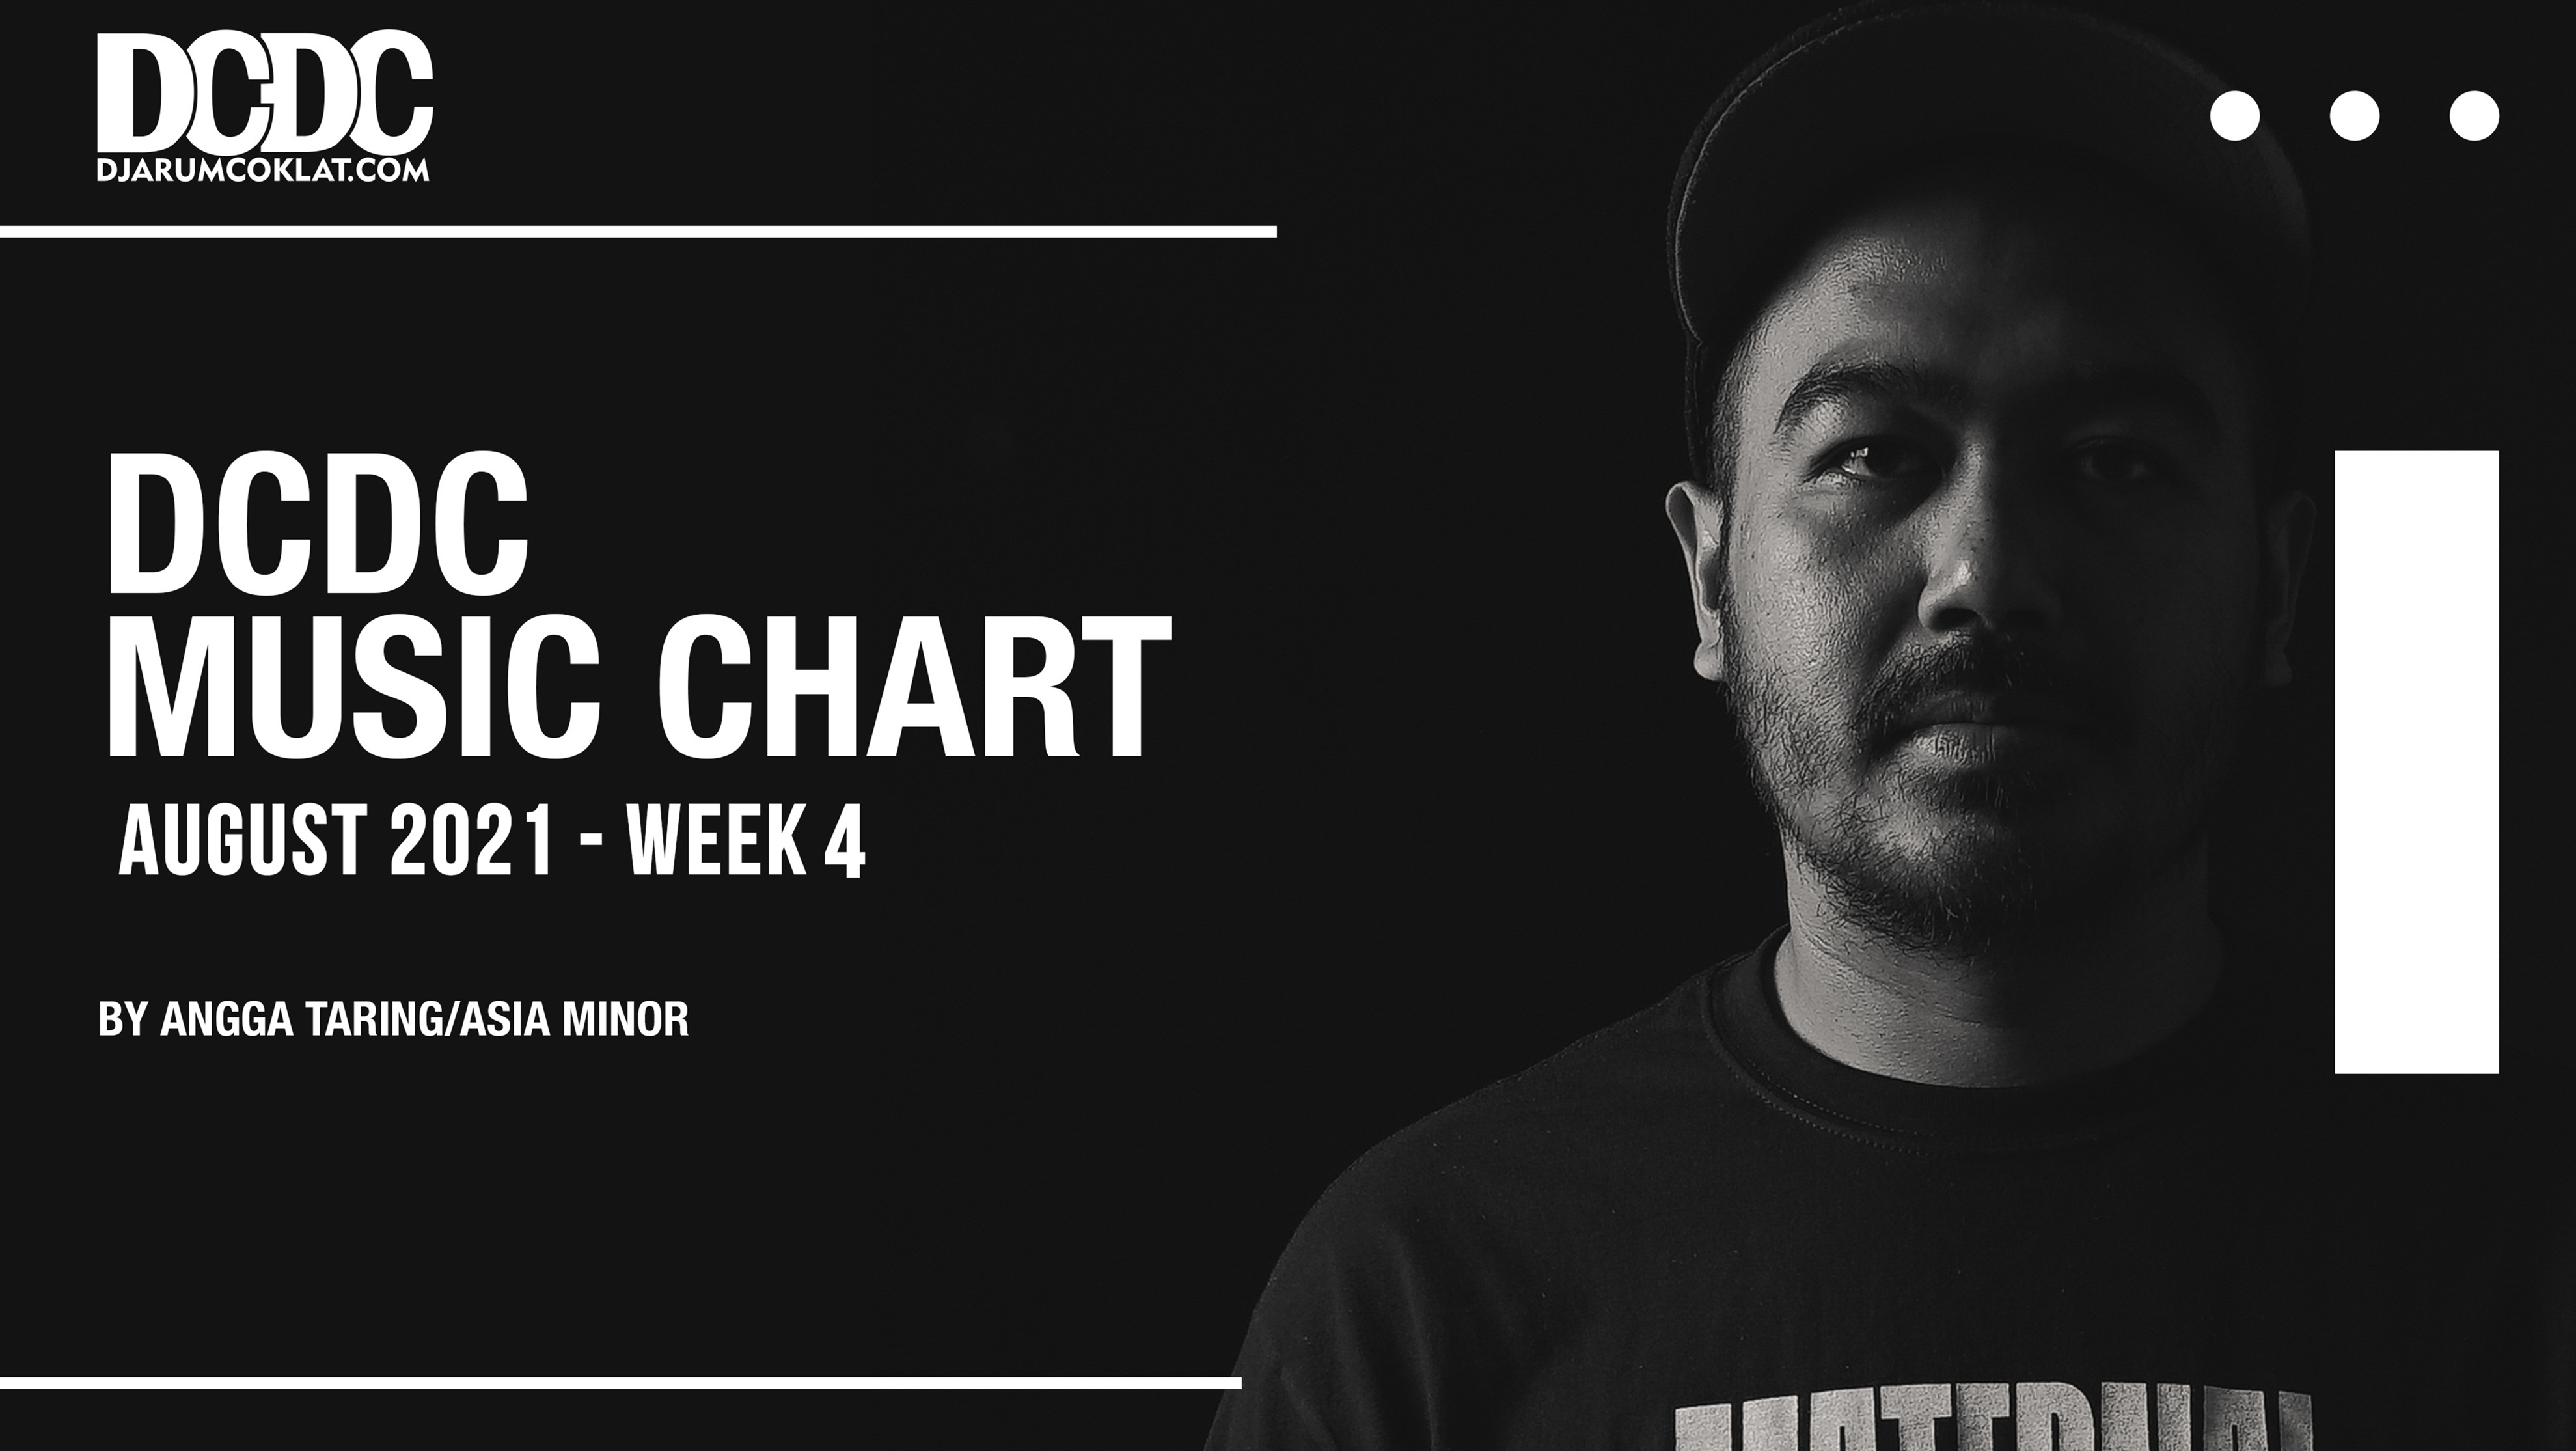 DCDC Music Chart - 4th Week of August 2021